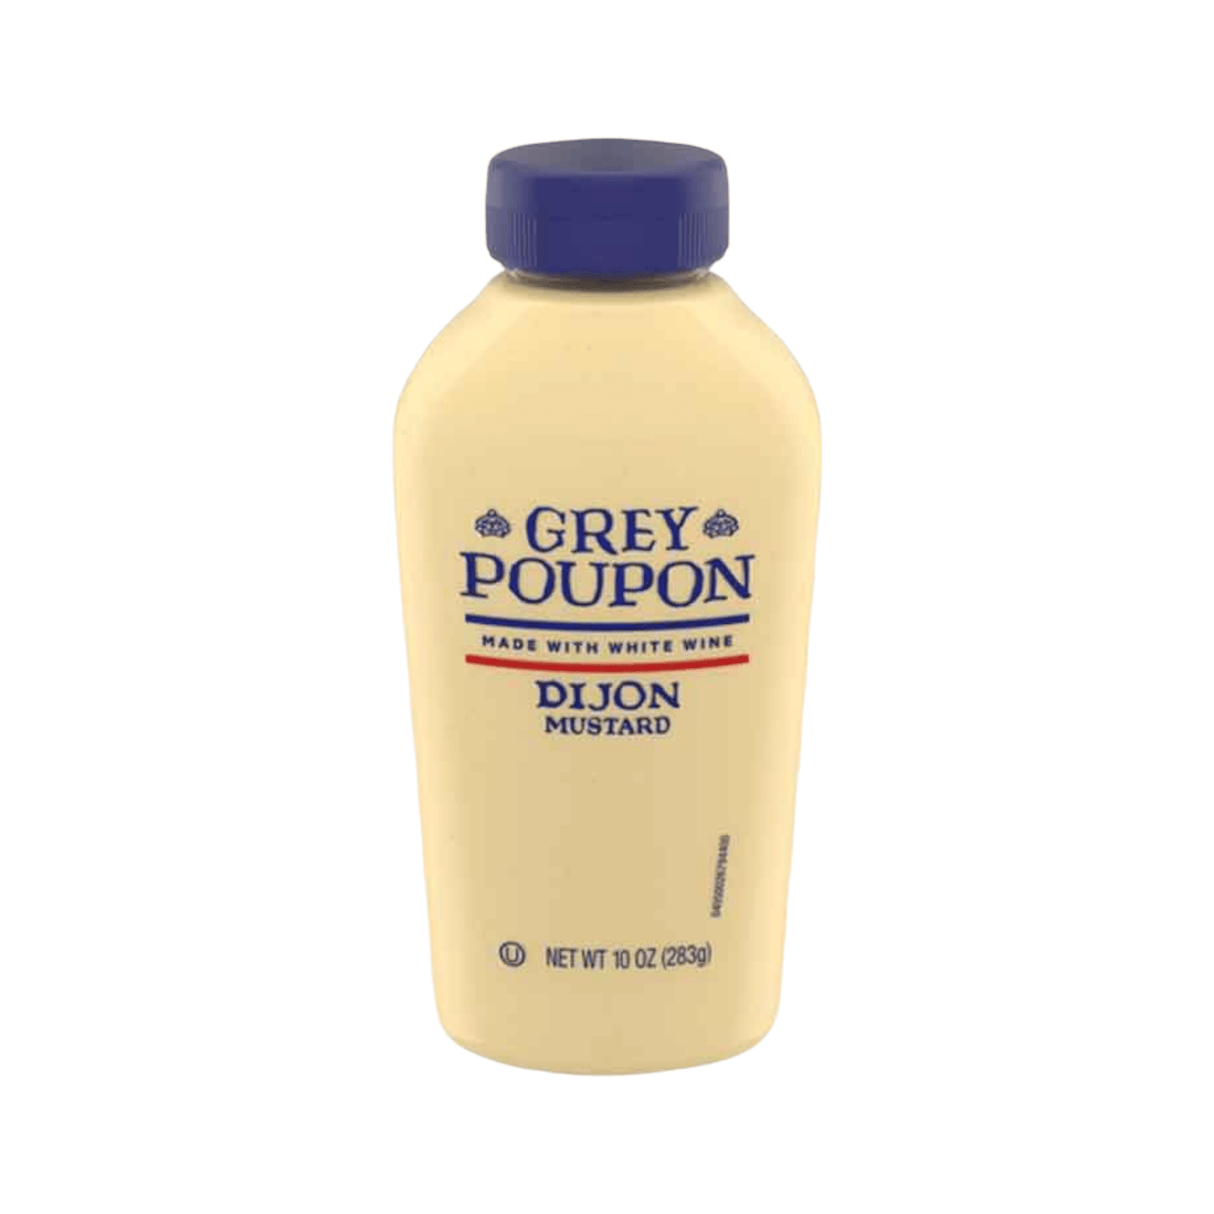 Grey Poupon made with White Wine Mustard